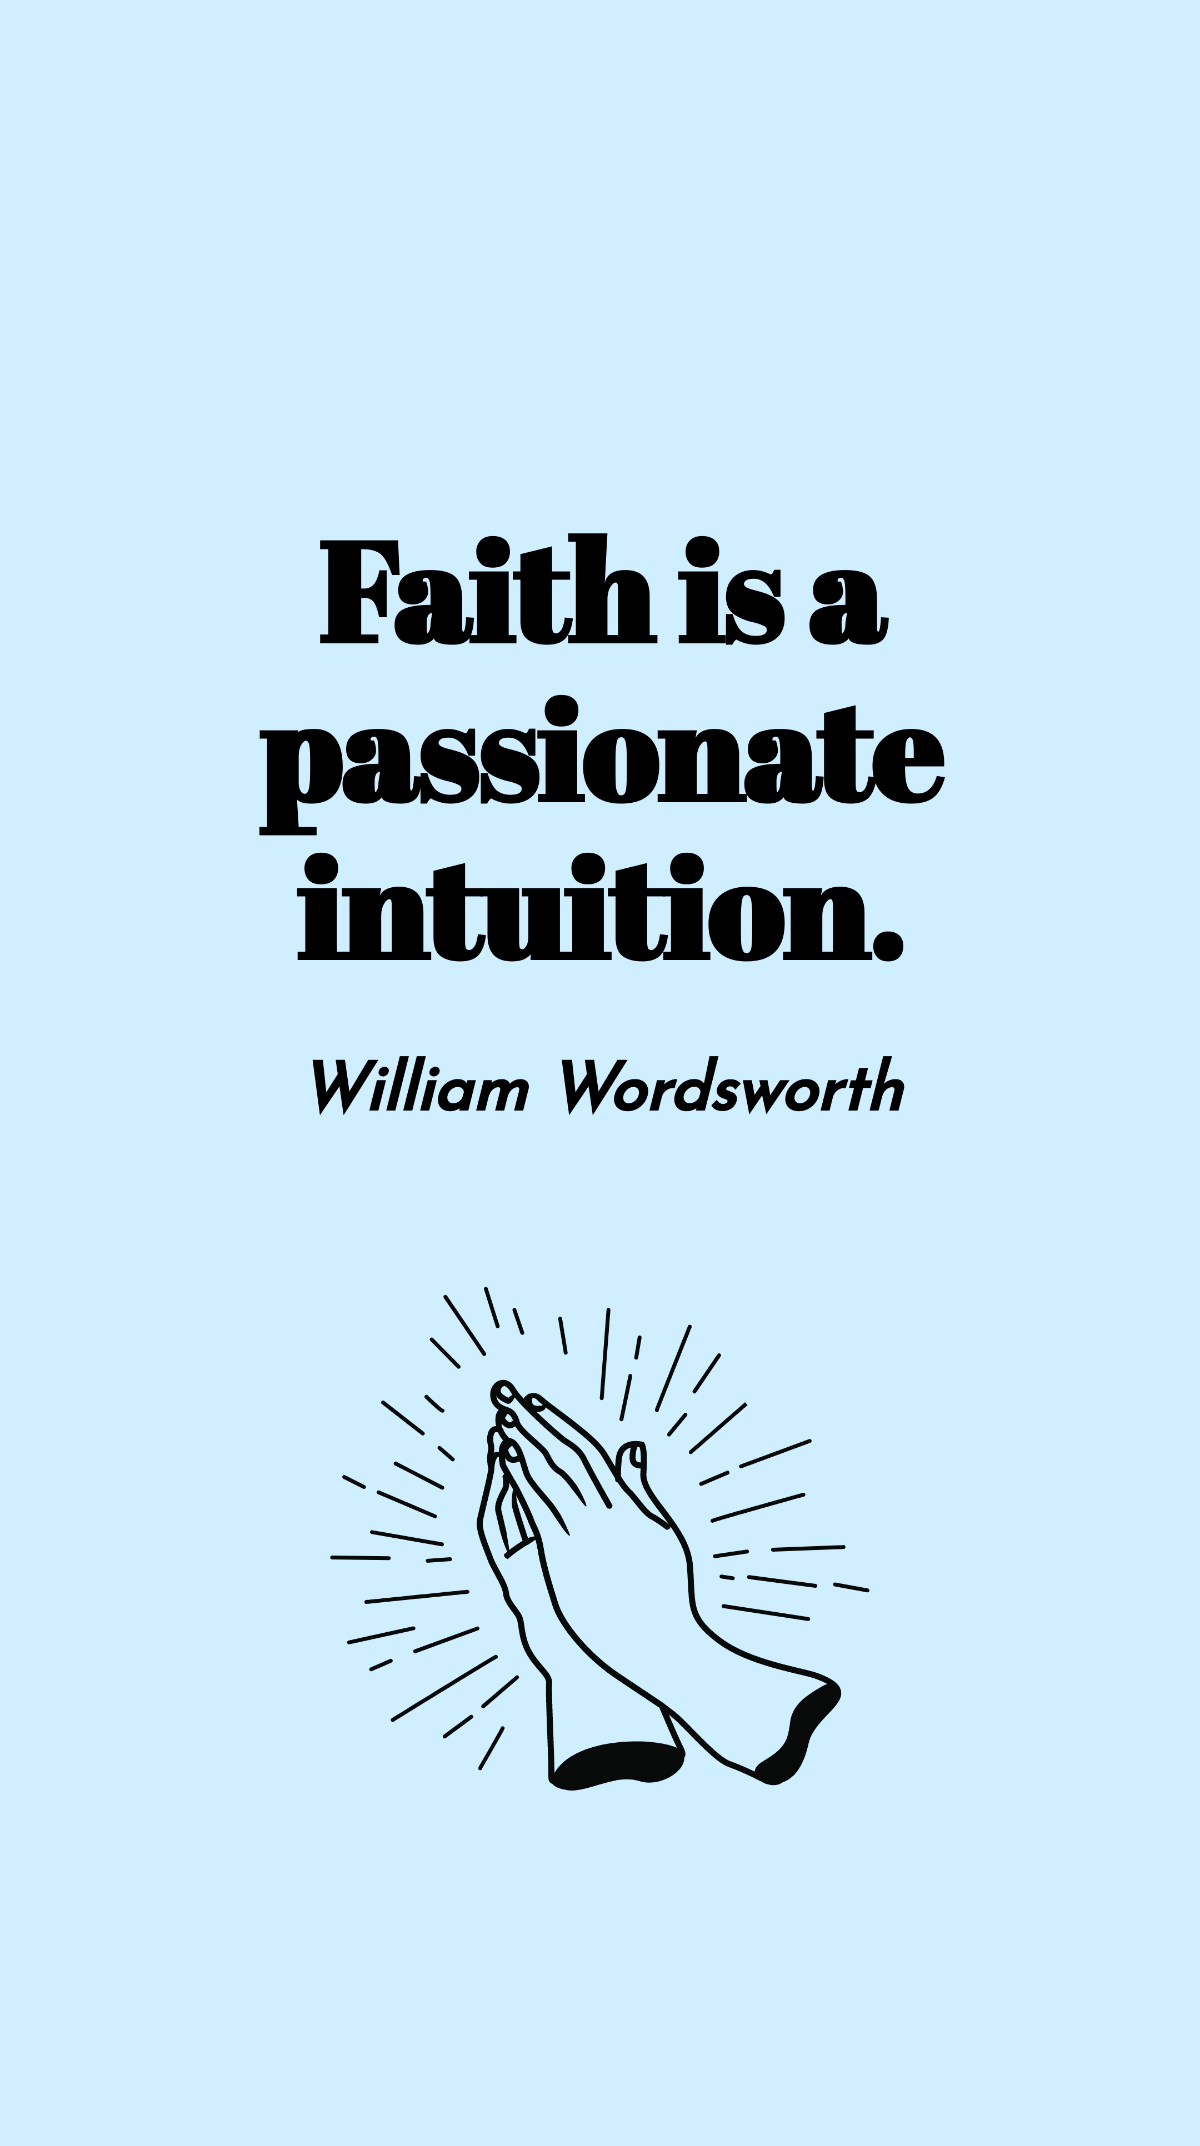 William Wordsworth - Faith is a passionate intuition. Template